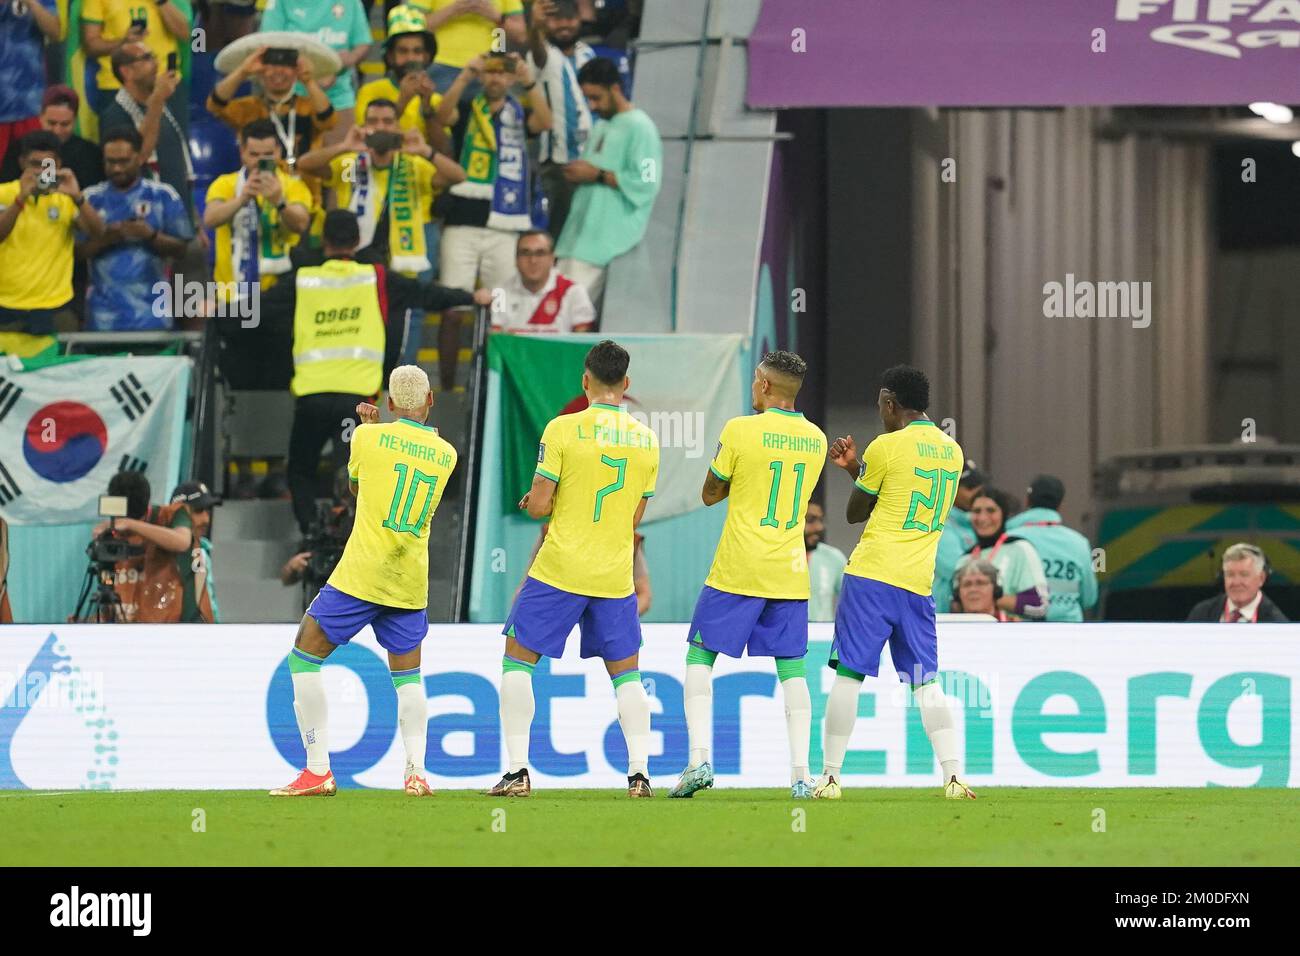 DOHA, QATAR - DECEMBER 5: Player of Brazil Lucas Paquetá with his teammates Neymar, Raphinha and Vinícius Júnior after scoring a goal during the FIFA World Cup Qatar 2022 Round of 16 match between Brazil and South Korea at Stadium 974 on December 5, 2022 in Doha, Qatar. (Photo by Florencia Tan Jun/PxImages) Stock Photo